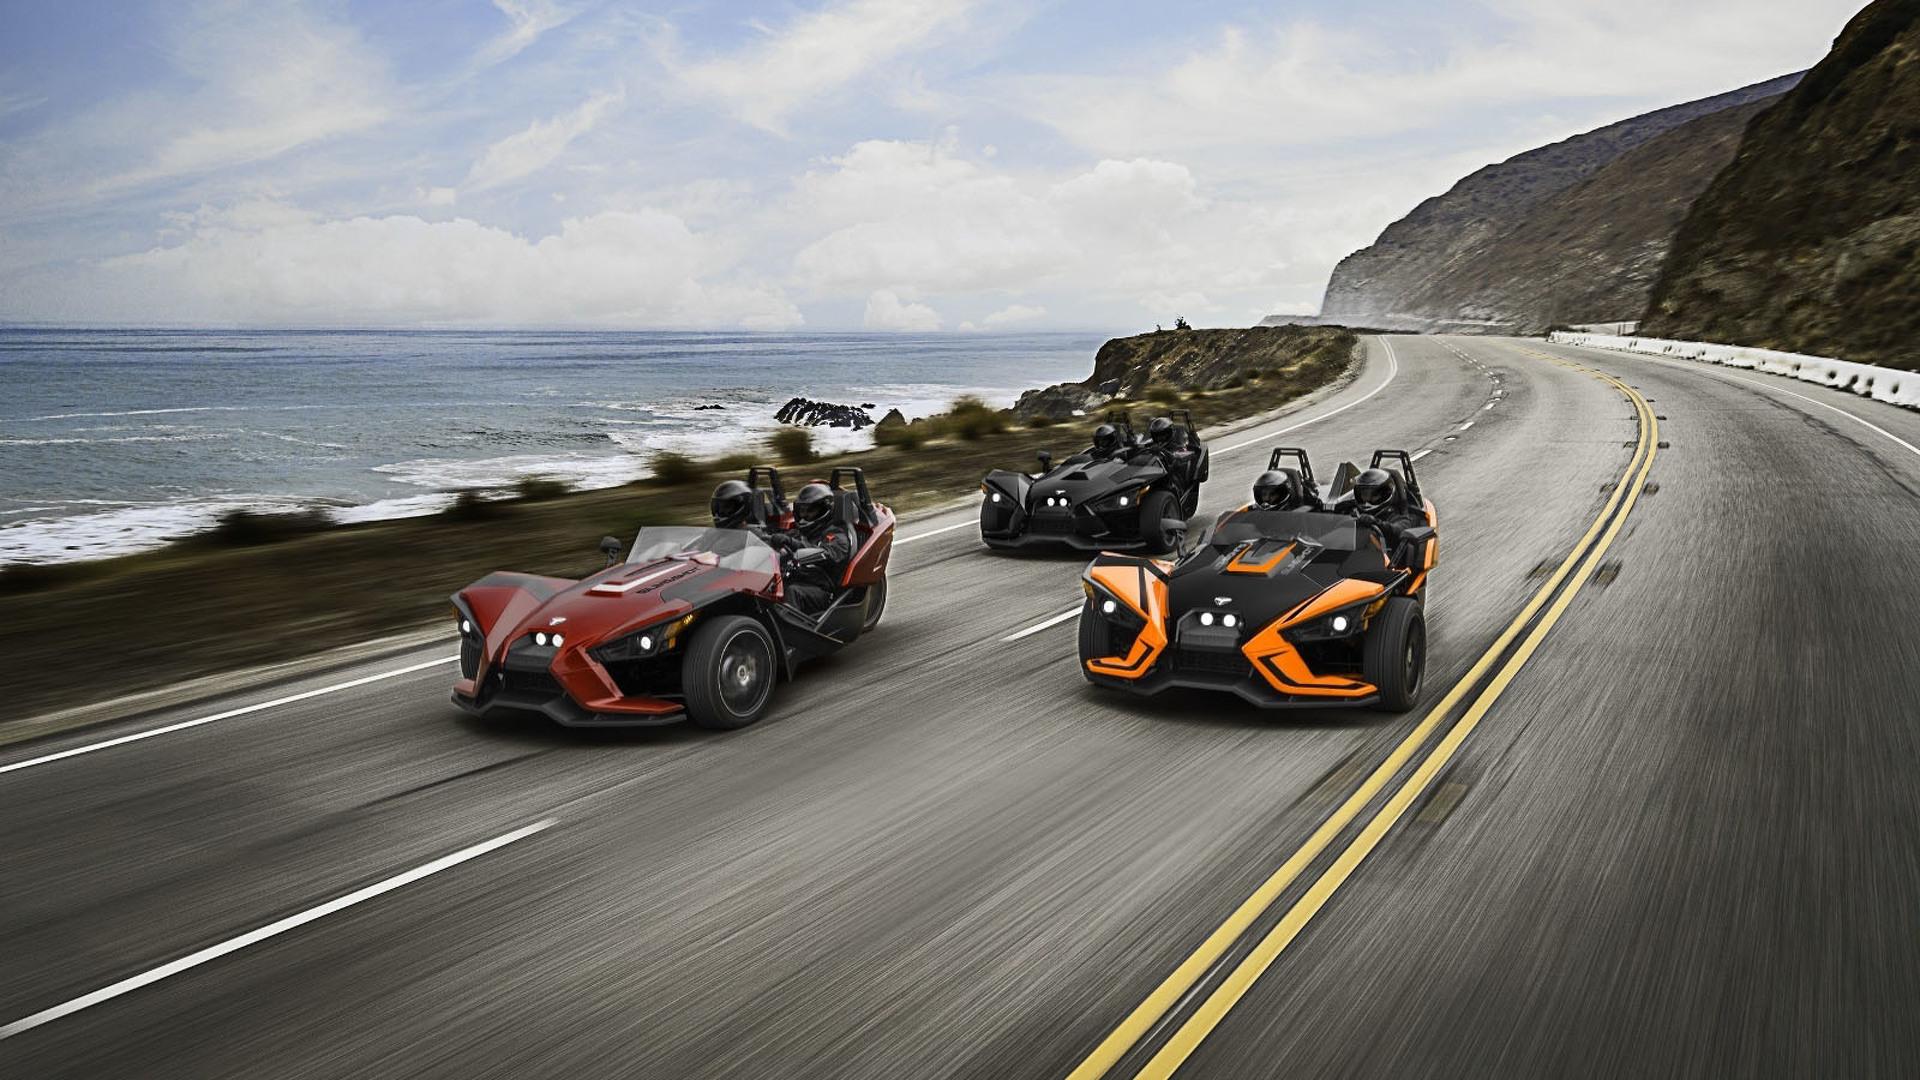 Polaris Slingshot gets luxury trim and removable roof